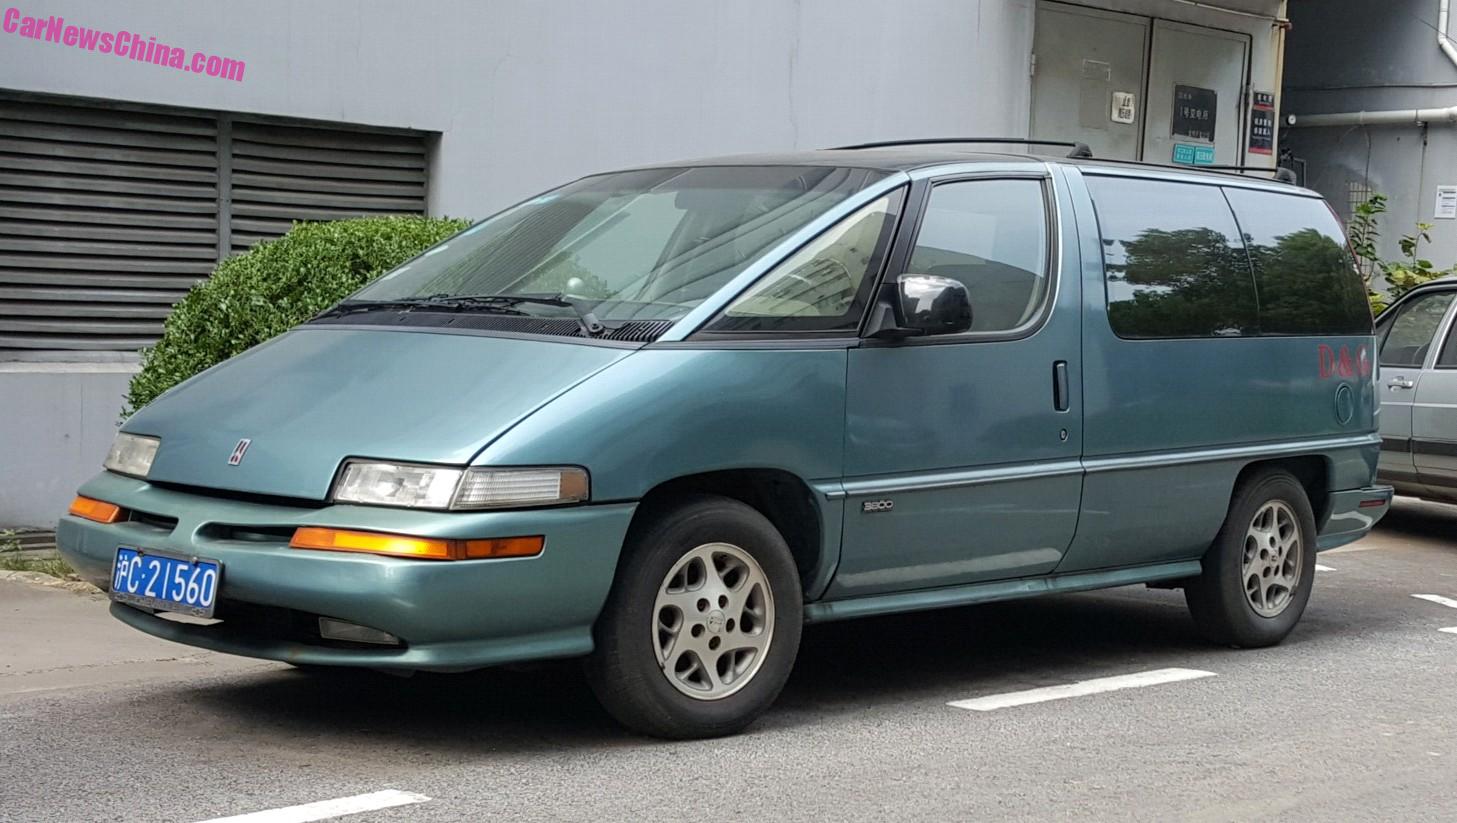 Spotted in China: Oldsmobile Silhouette